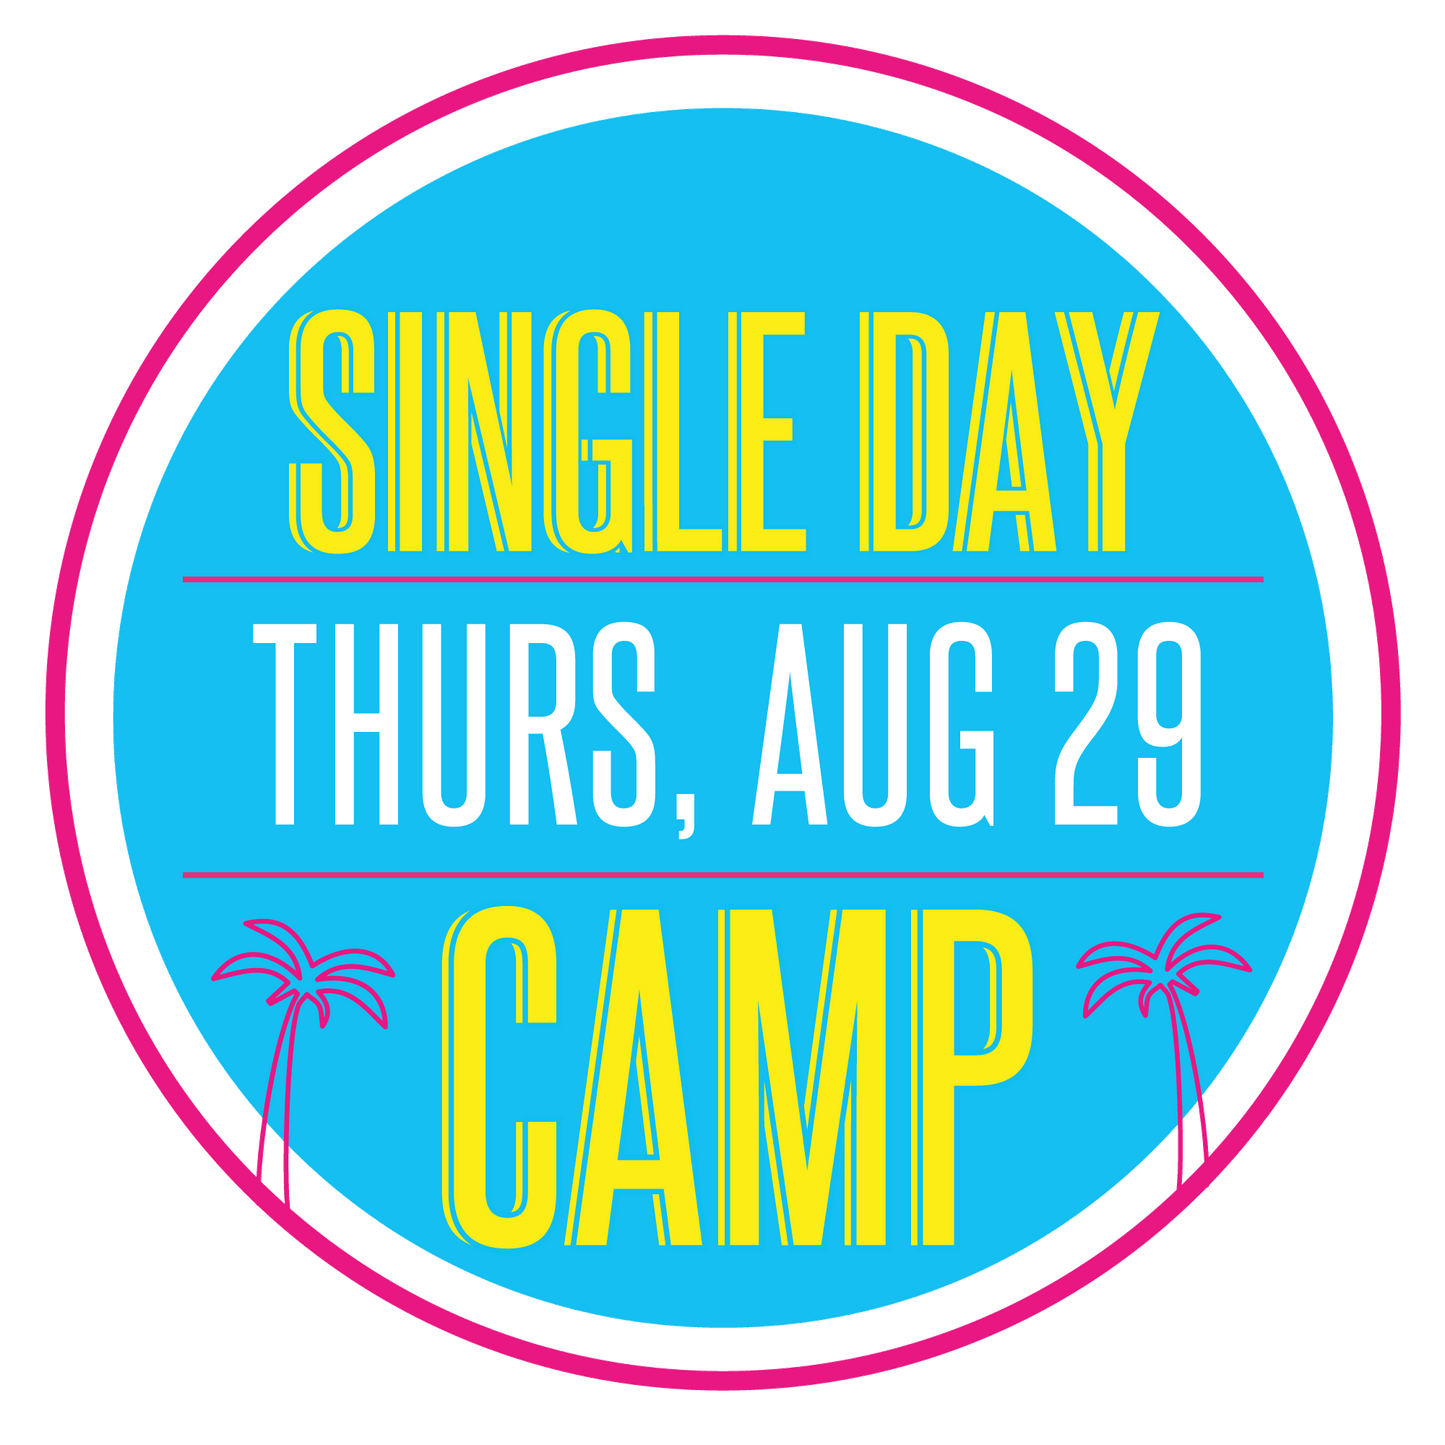 Single Day Sewing Workshop: Thursday, August 29, 9am-3pm